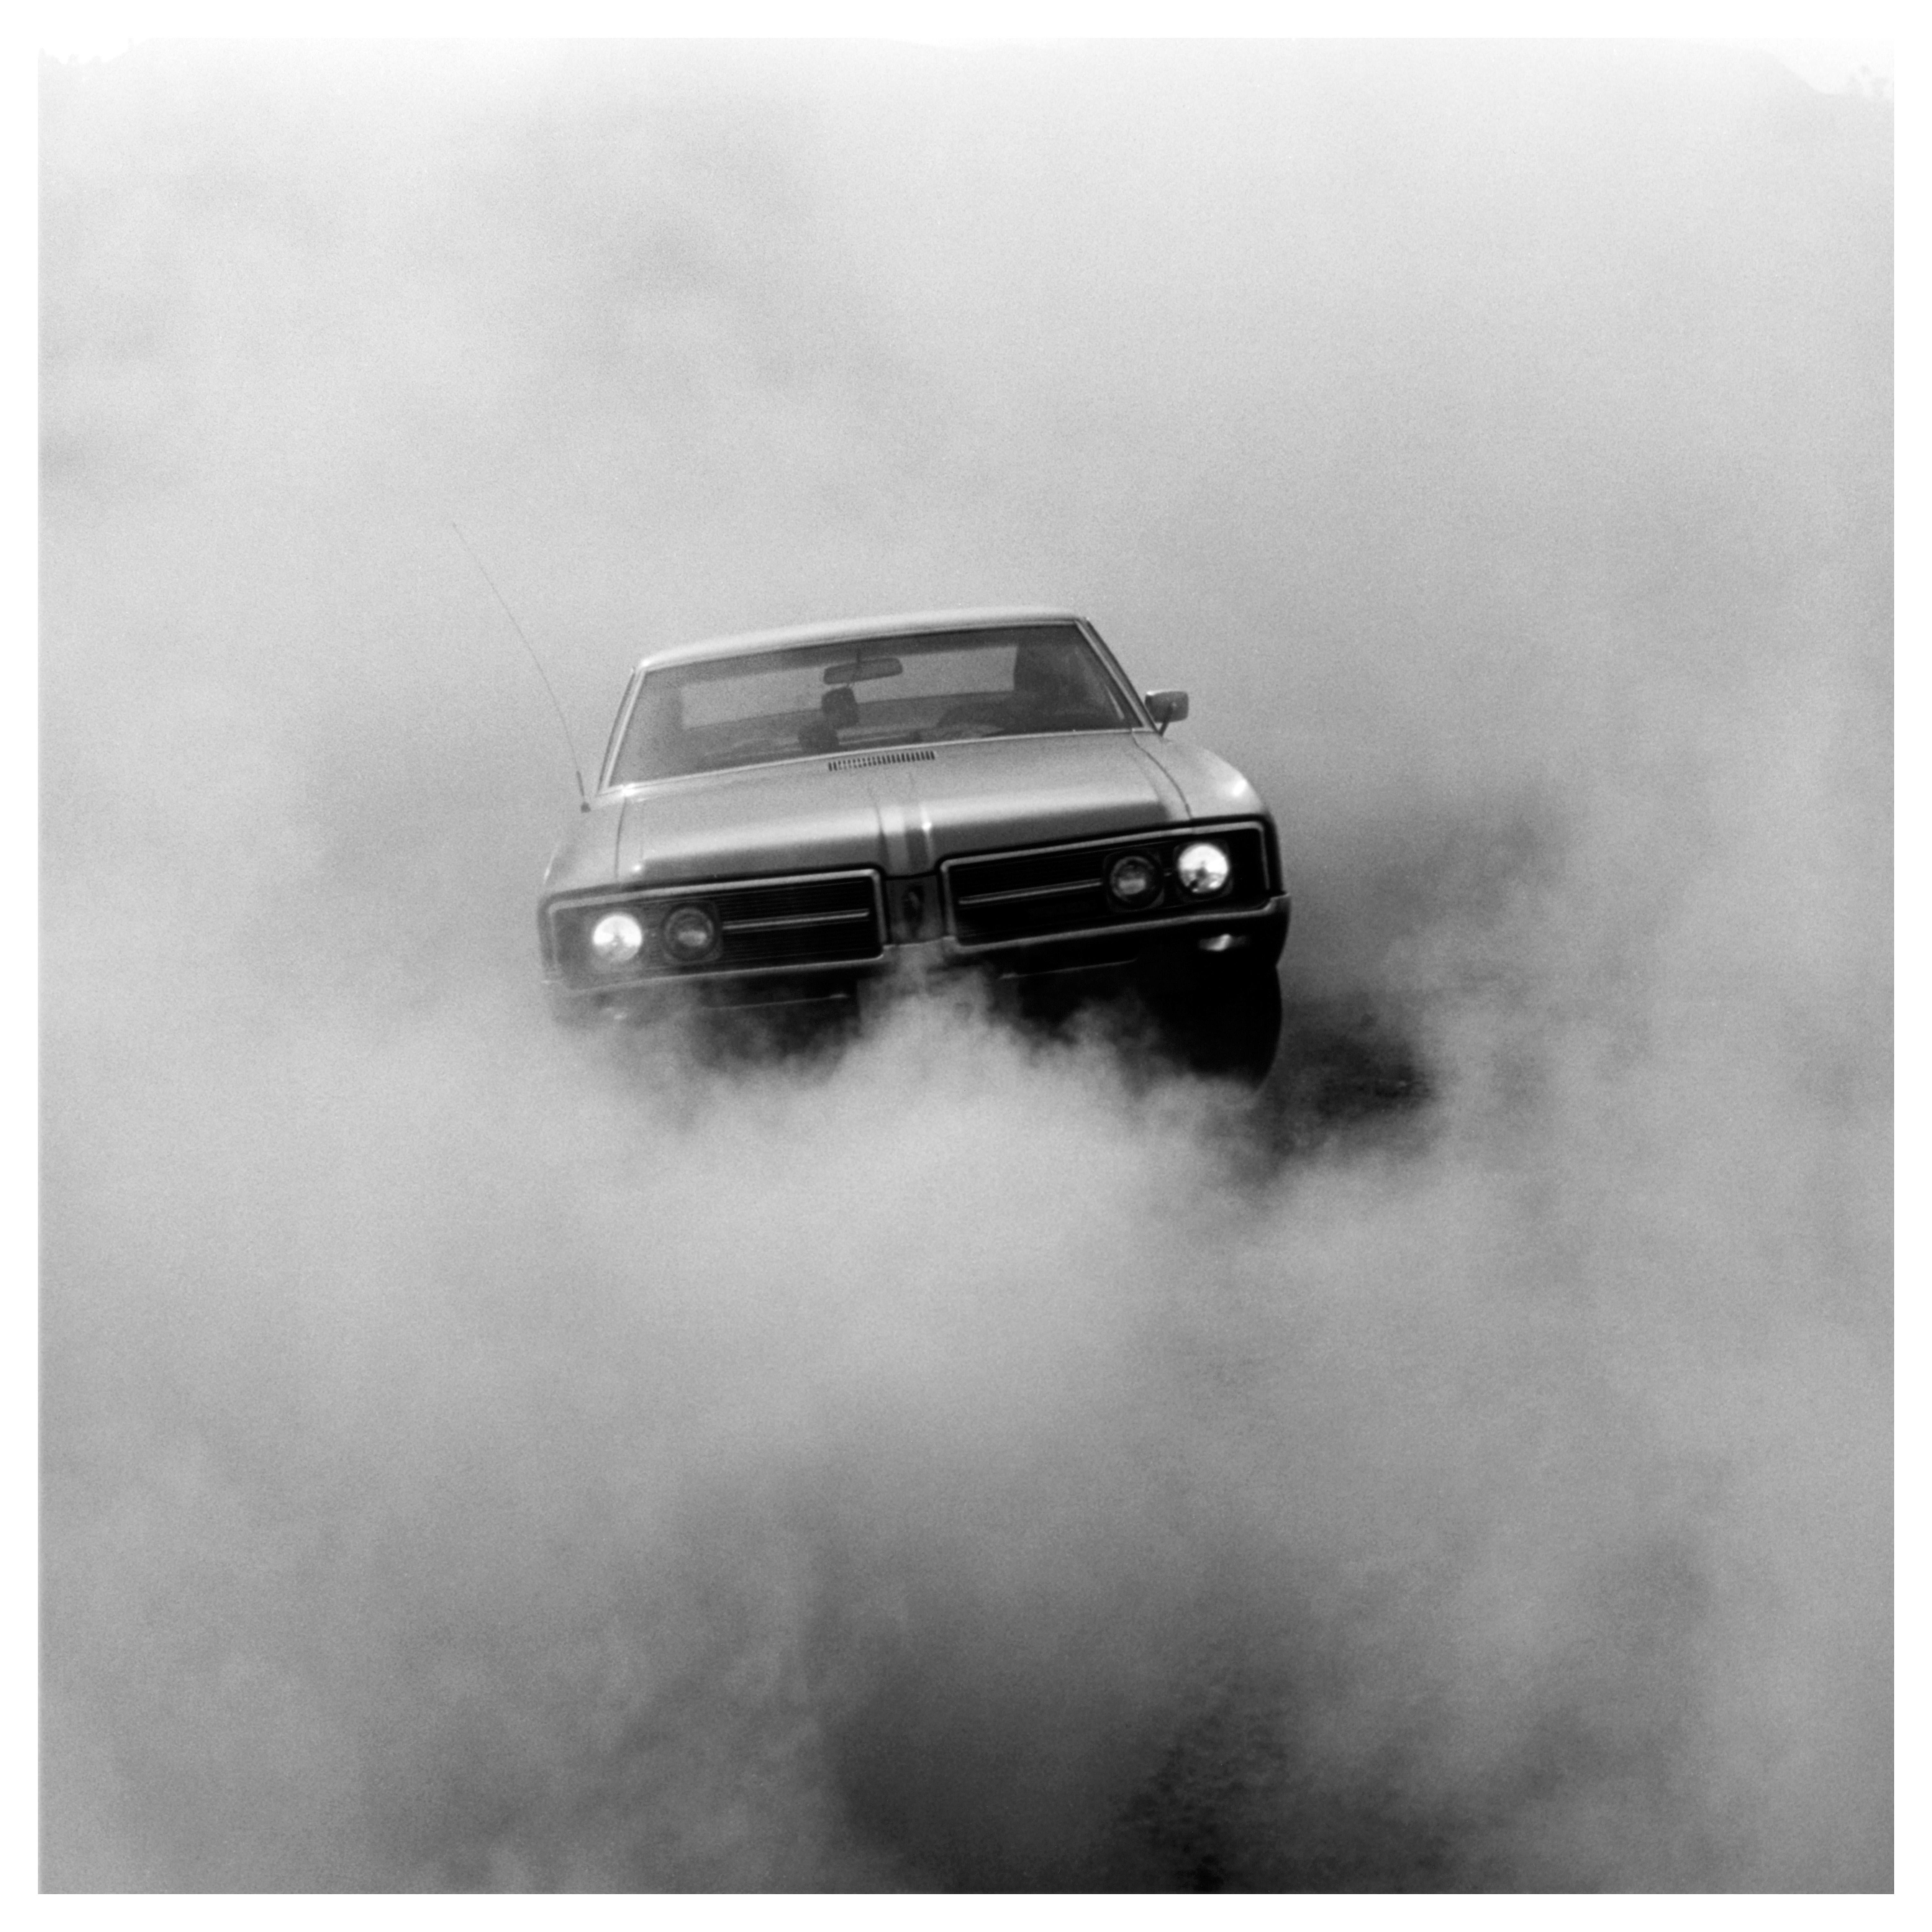 Richard Heeps Still-Life Photograph - Buick in the Dust, Hemsby - Black and White Square Car Photography